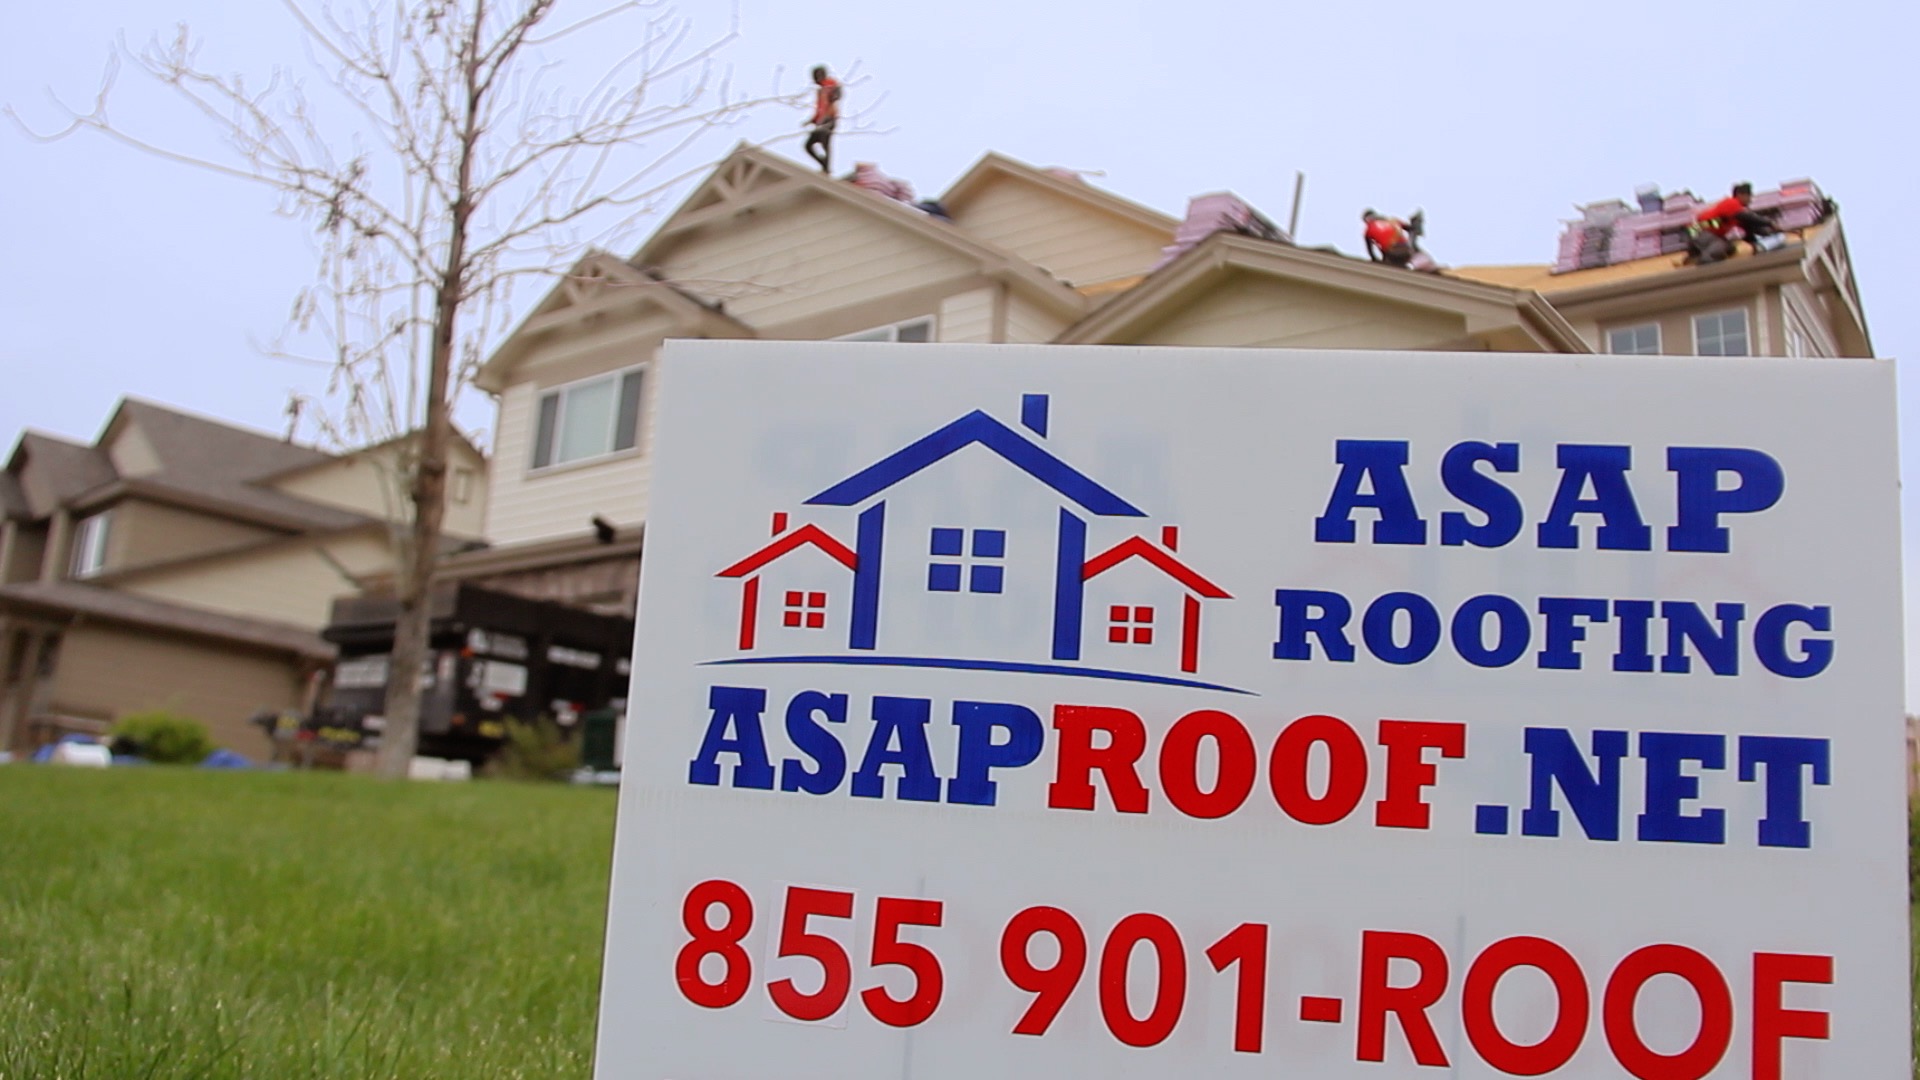 A well known sight, ASAP Roofing yard signs cover various neighborhoods after hail and wind storms.